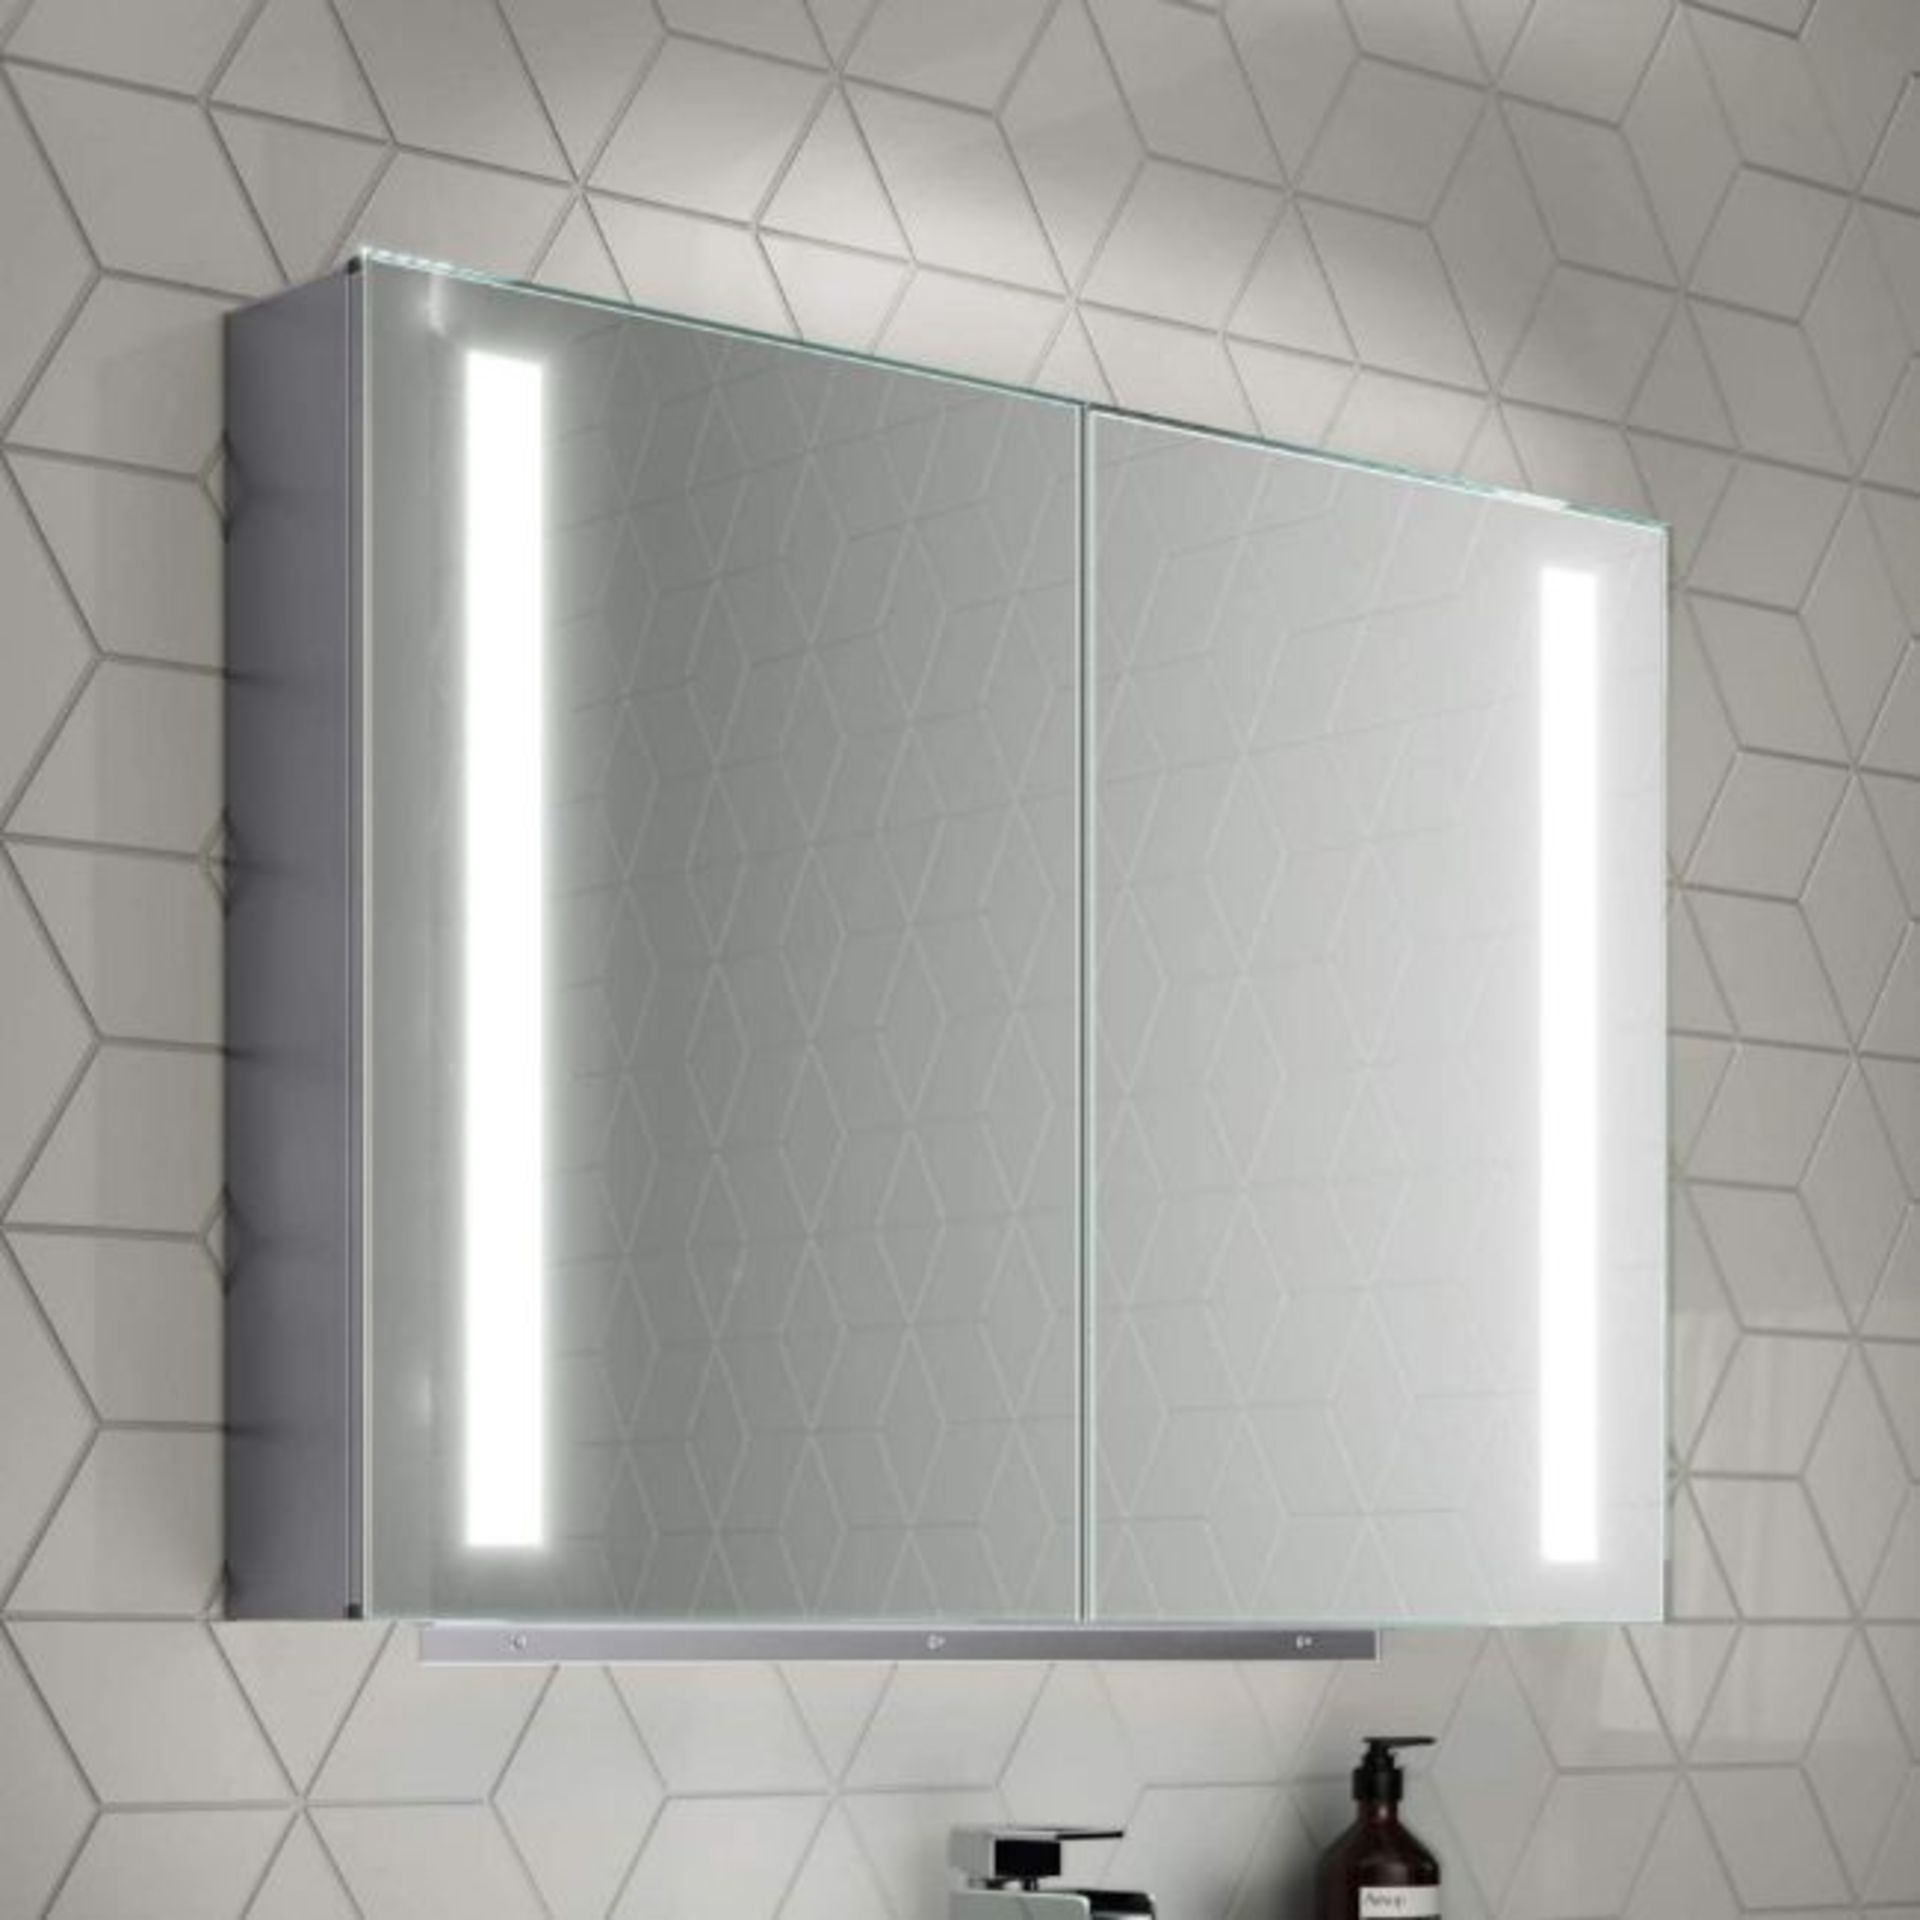 New 800 x 600 Dawn Illuminated Led Mirror Cabinet. RRP £939.99.Mc164. We Love This Mirror Cabinet As